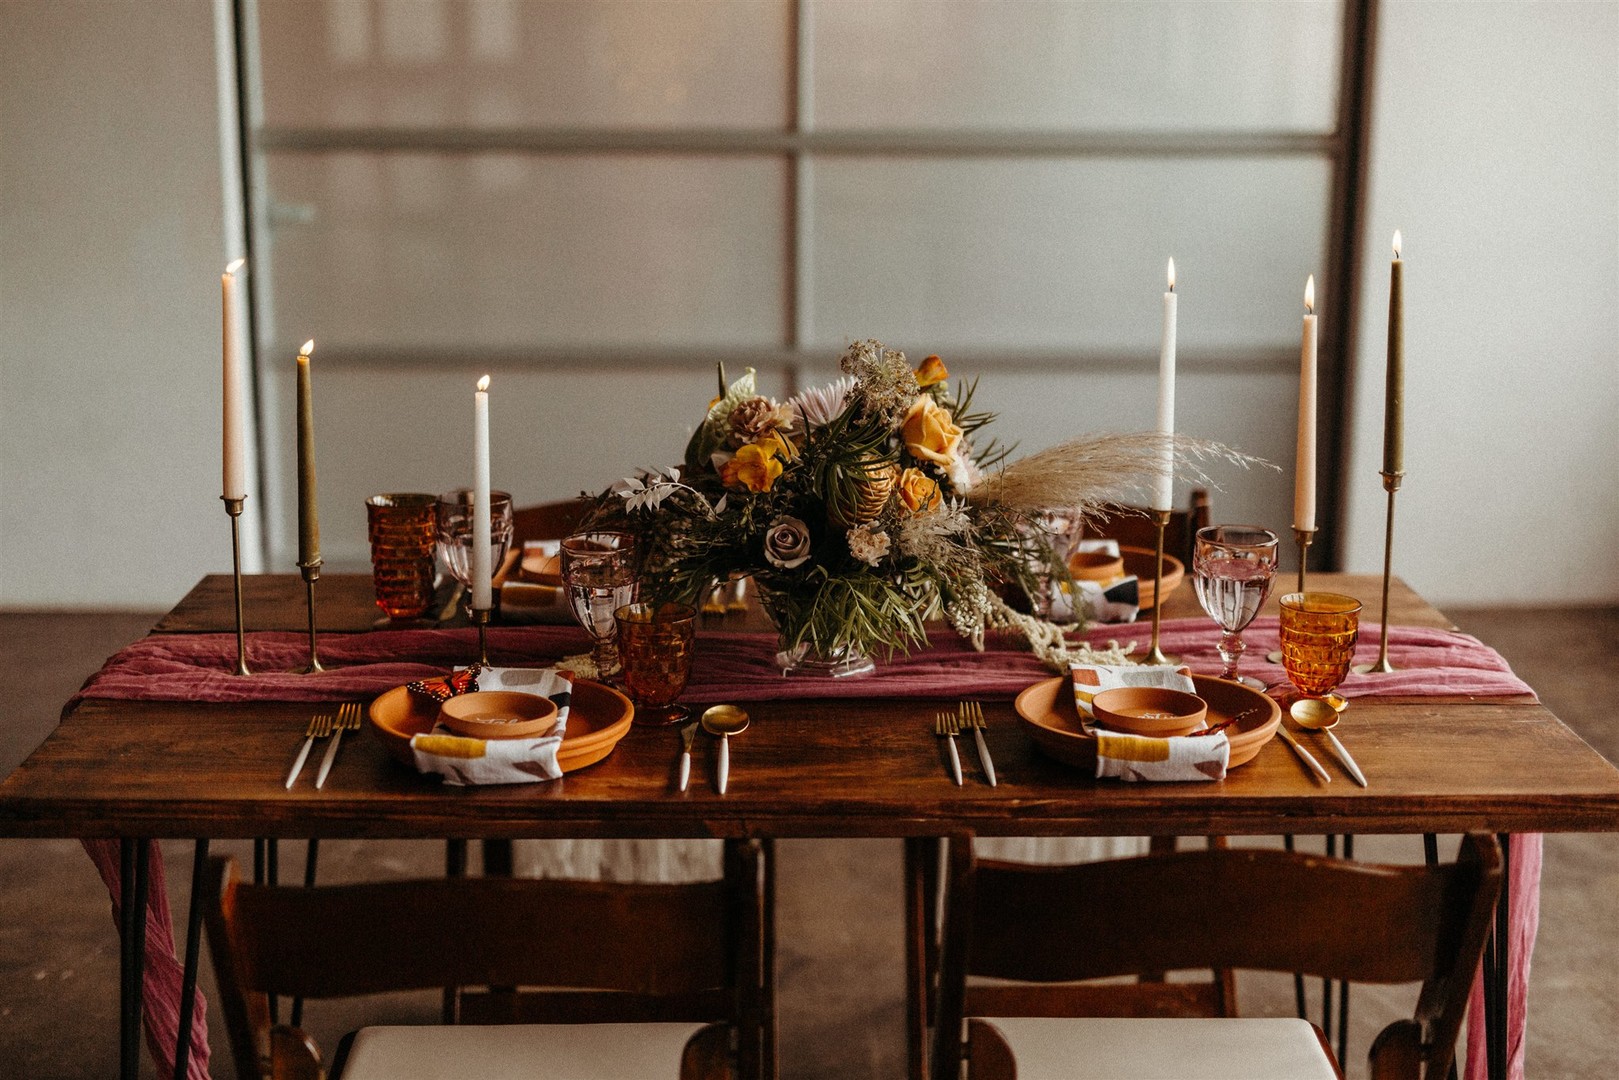 The wedding tablescape was done with a pink table runner, tall candles, a bold floral centerpiece and terra cotta plates